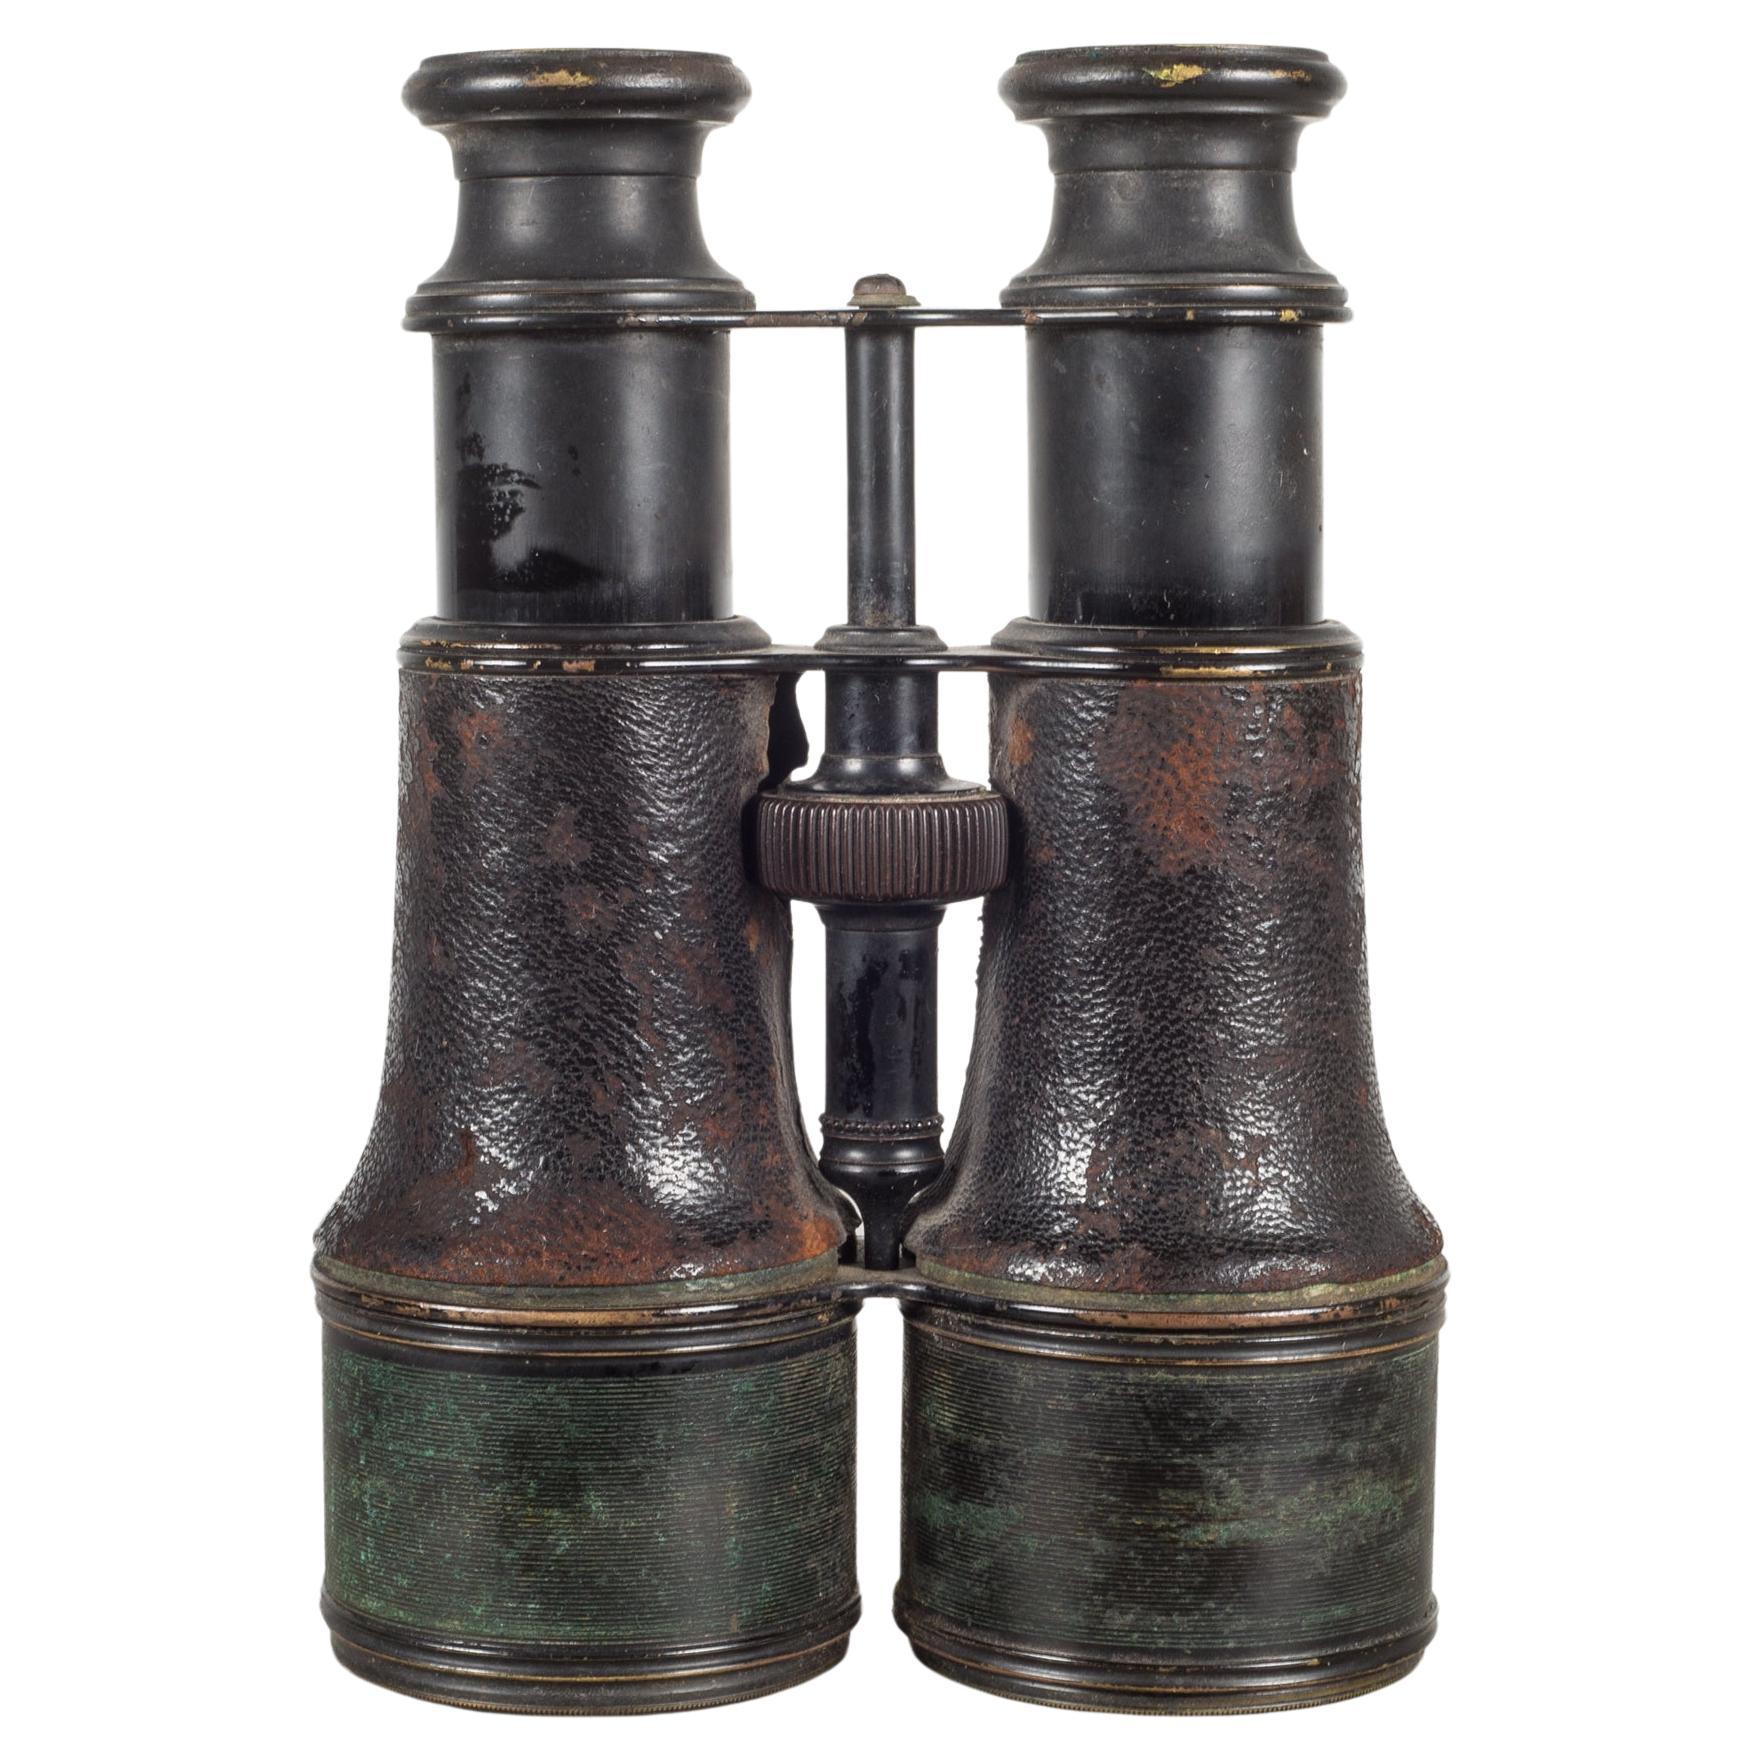 19th C. Leather Wrapped French Field Binoculars, c.1880